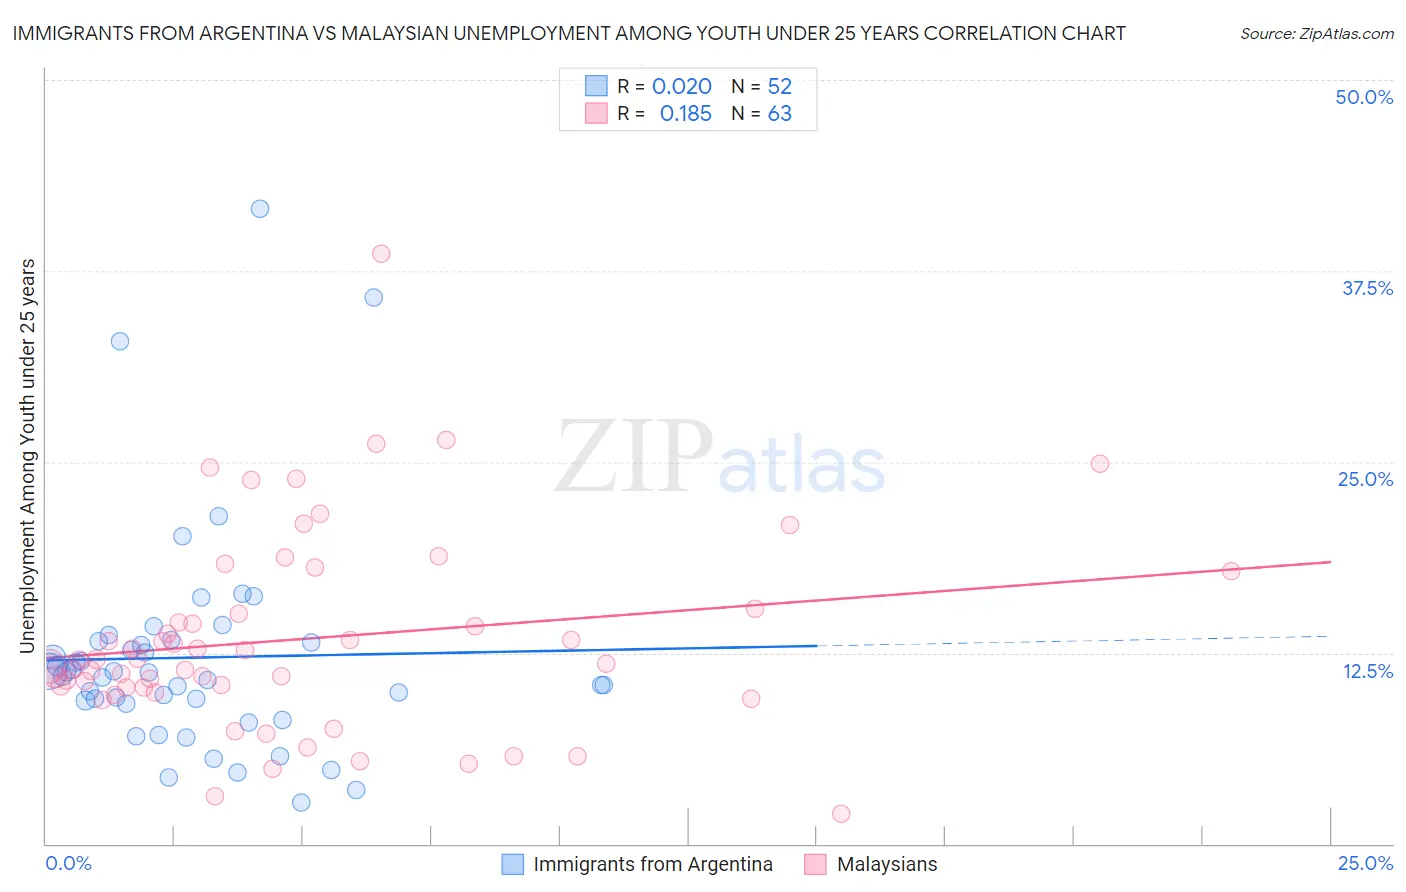 Immigrants from Argentina vs Malaysian Unemployment Among Youth under 25 years